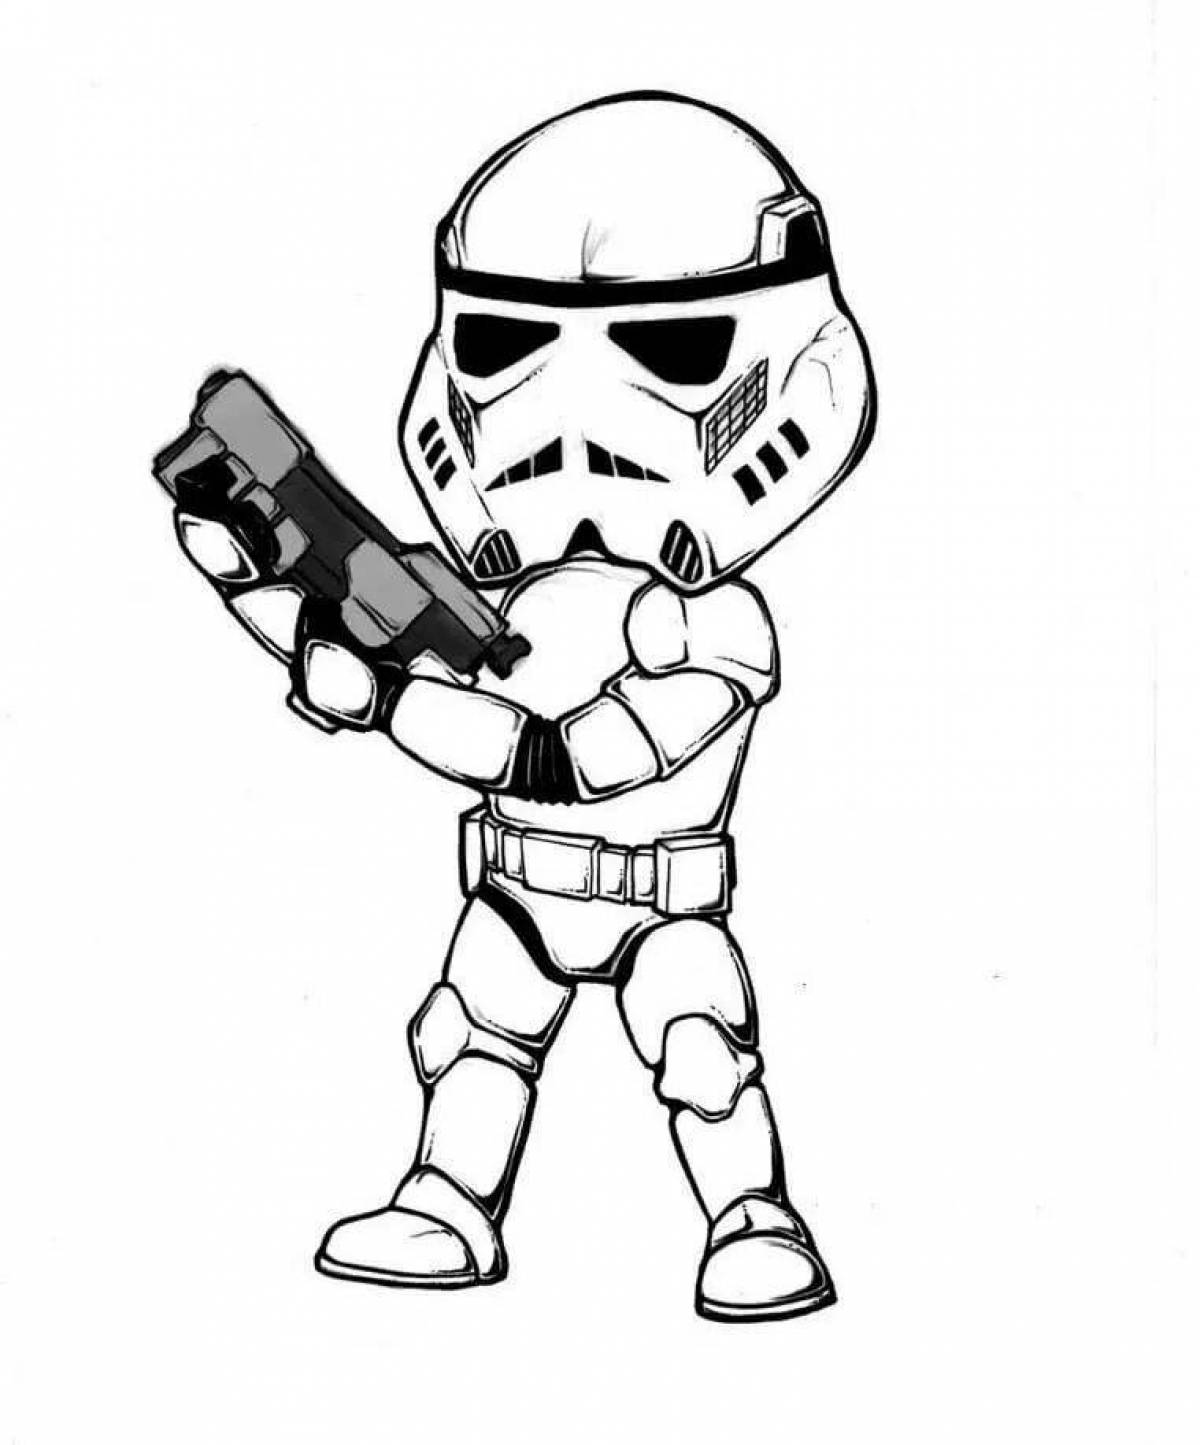 Impressive stormtrooper coloring page